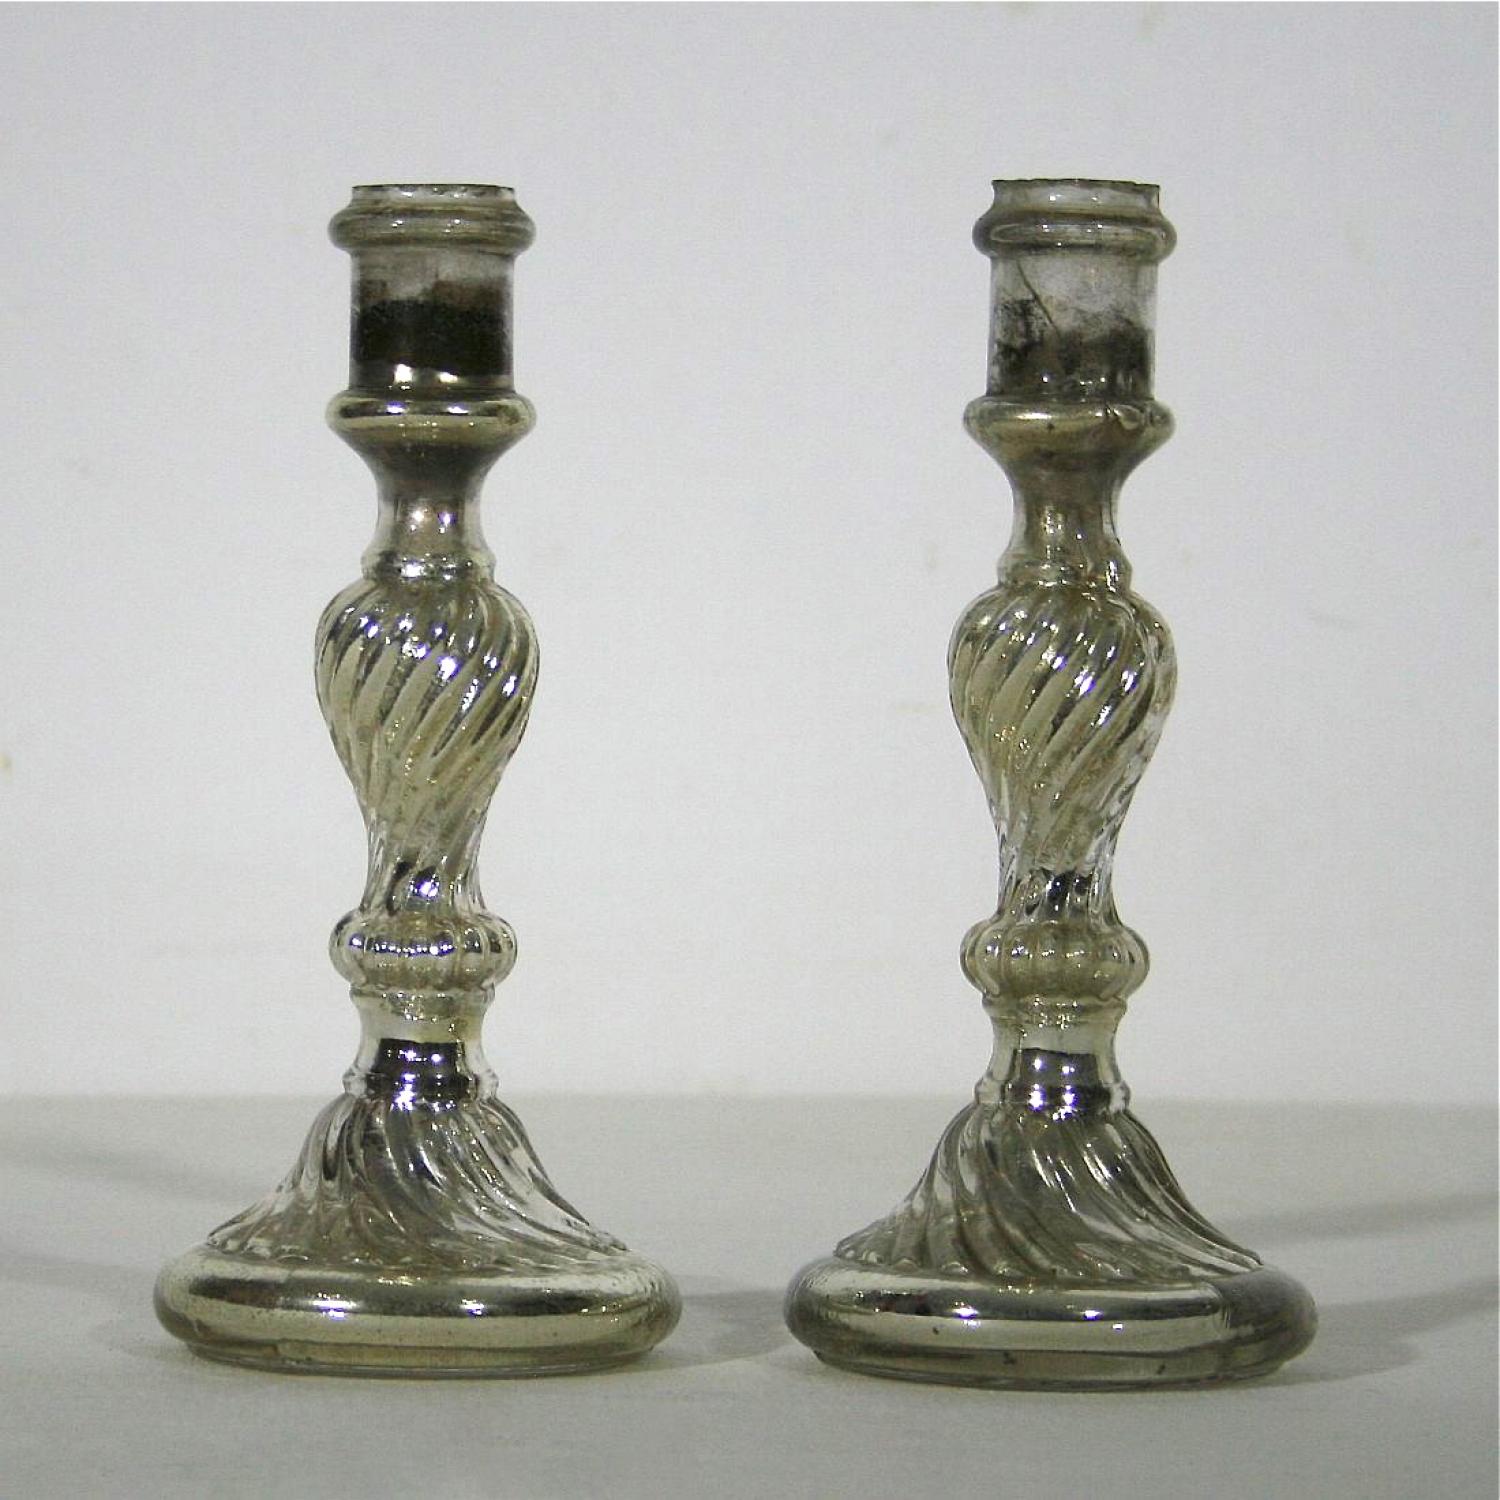 PAIR OF FRENCH MERCURY GLASS CANDLESTICKS